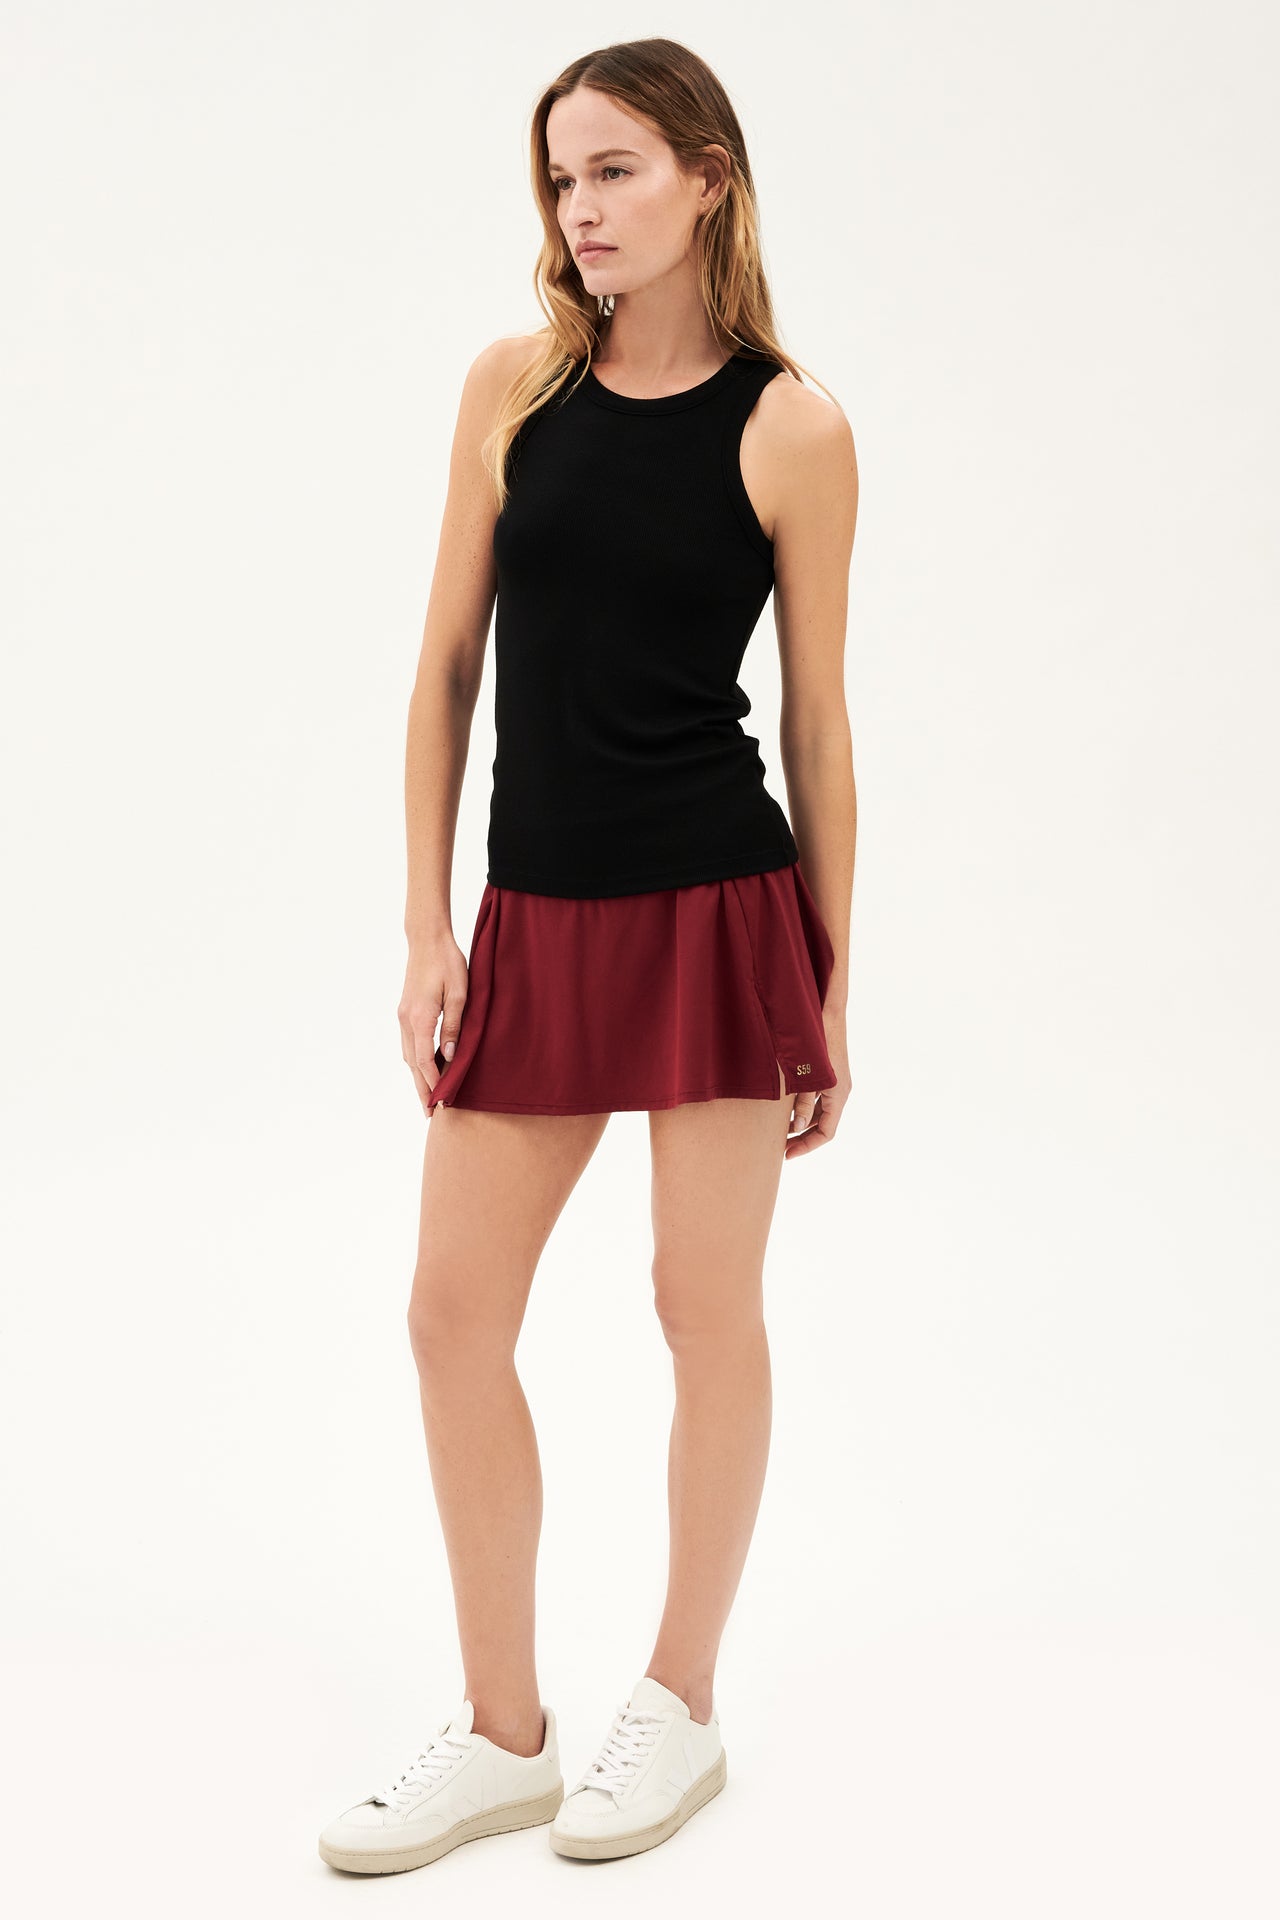 Full front side view of woman with dark blonde hair wearing a blank tank top and dark red skort with white shoes 